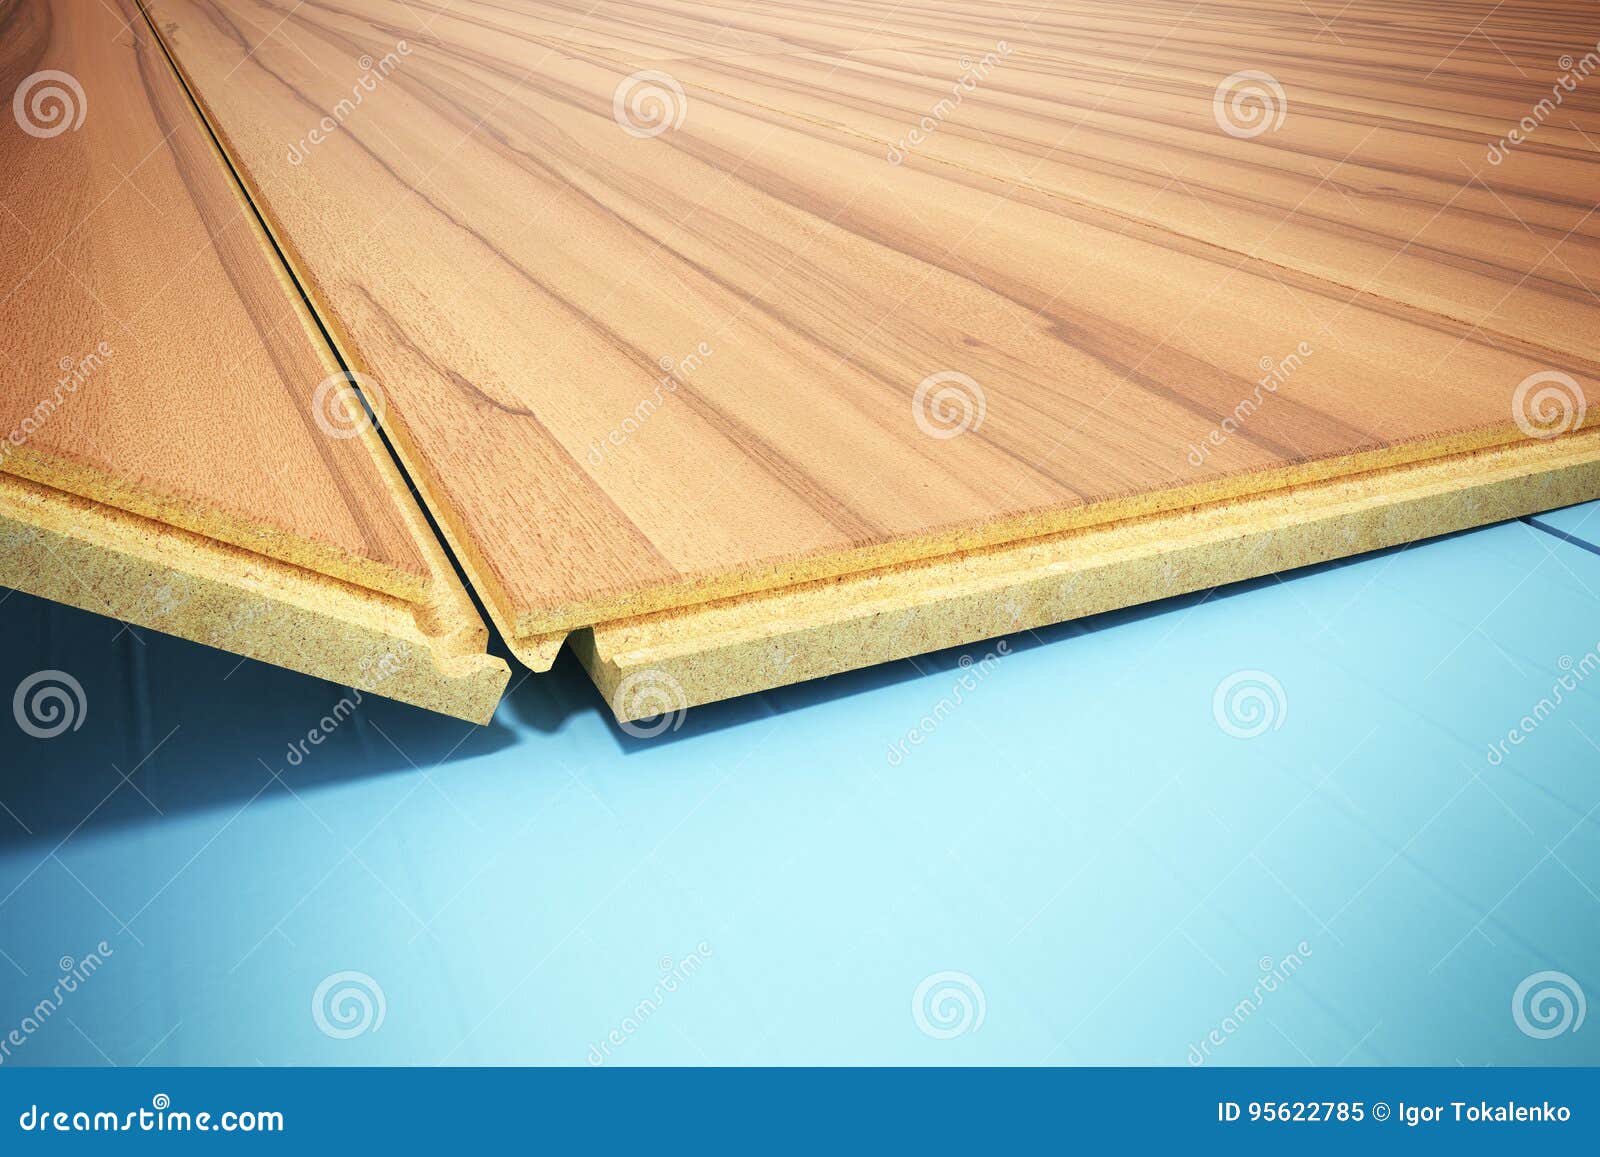 Installing Wooden Laminate Flooring With Insulation And